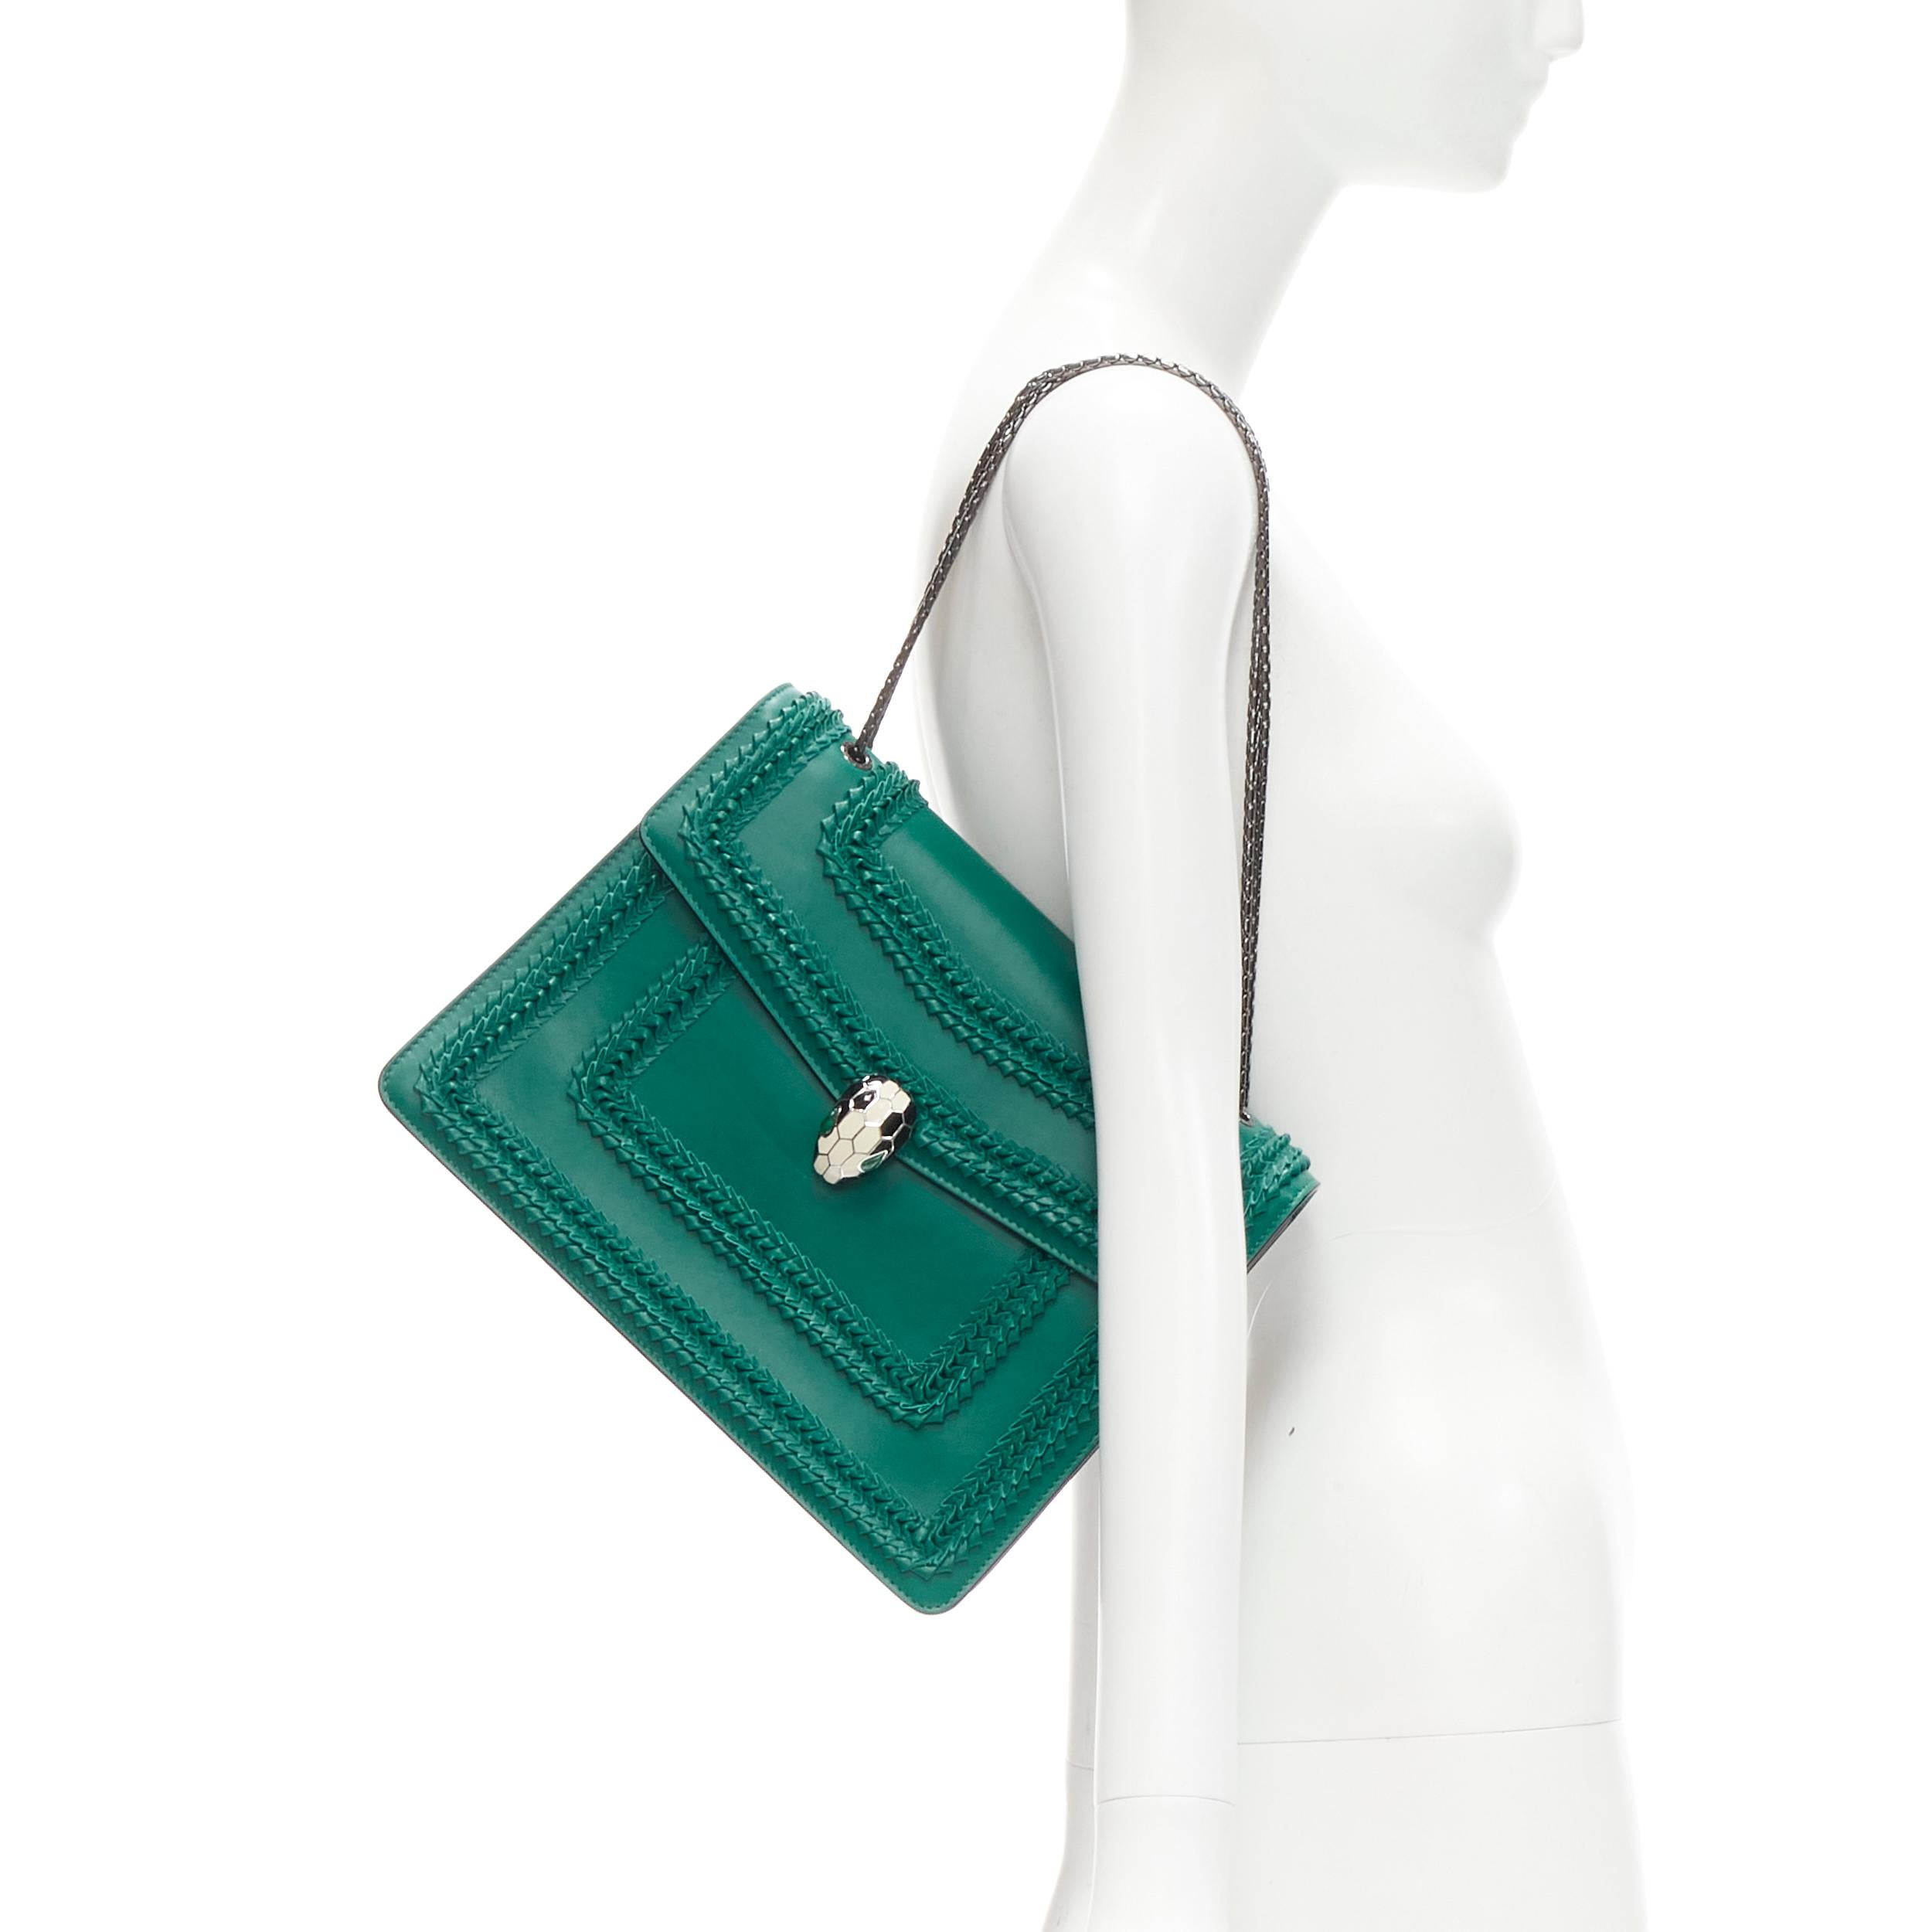 rare BVLGARI Serpenti Foever Large green whipstitch snake head flap shoulder bag
Brand: Bvlgari
Model: Serpenti Forever
Collection: Serpenti Forever 
Extra Detail: Kelly green leather. Pinched leather in whipstitching detail trim. Enamel Serpent